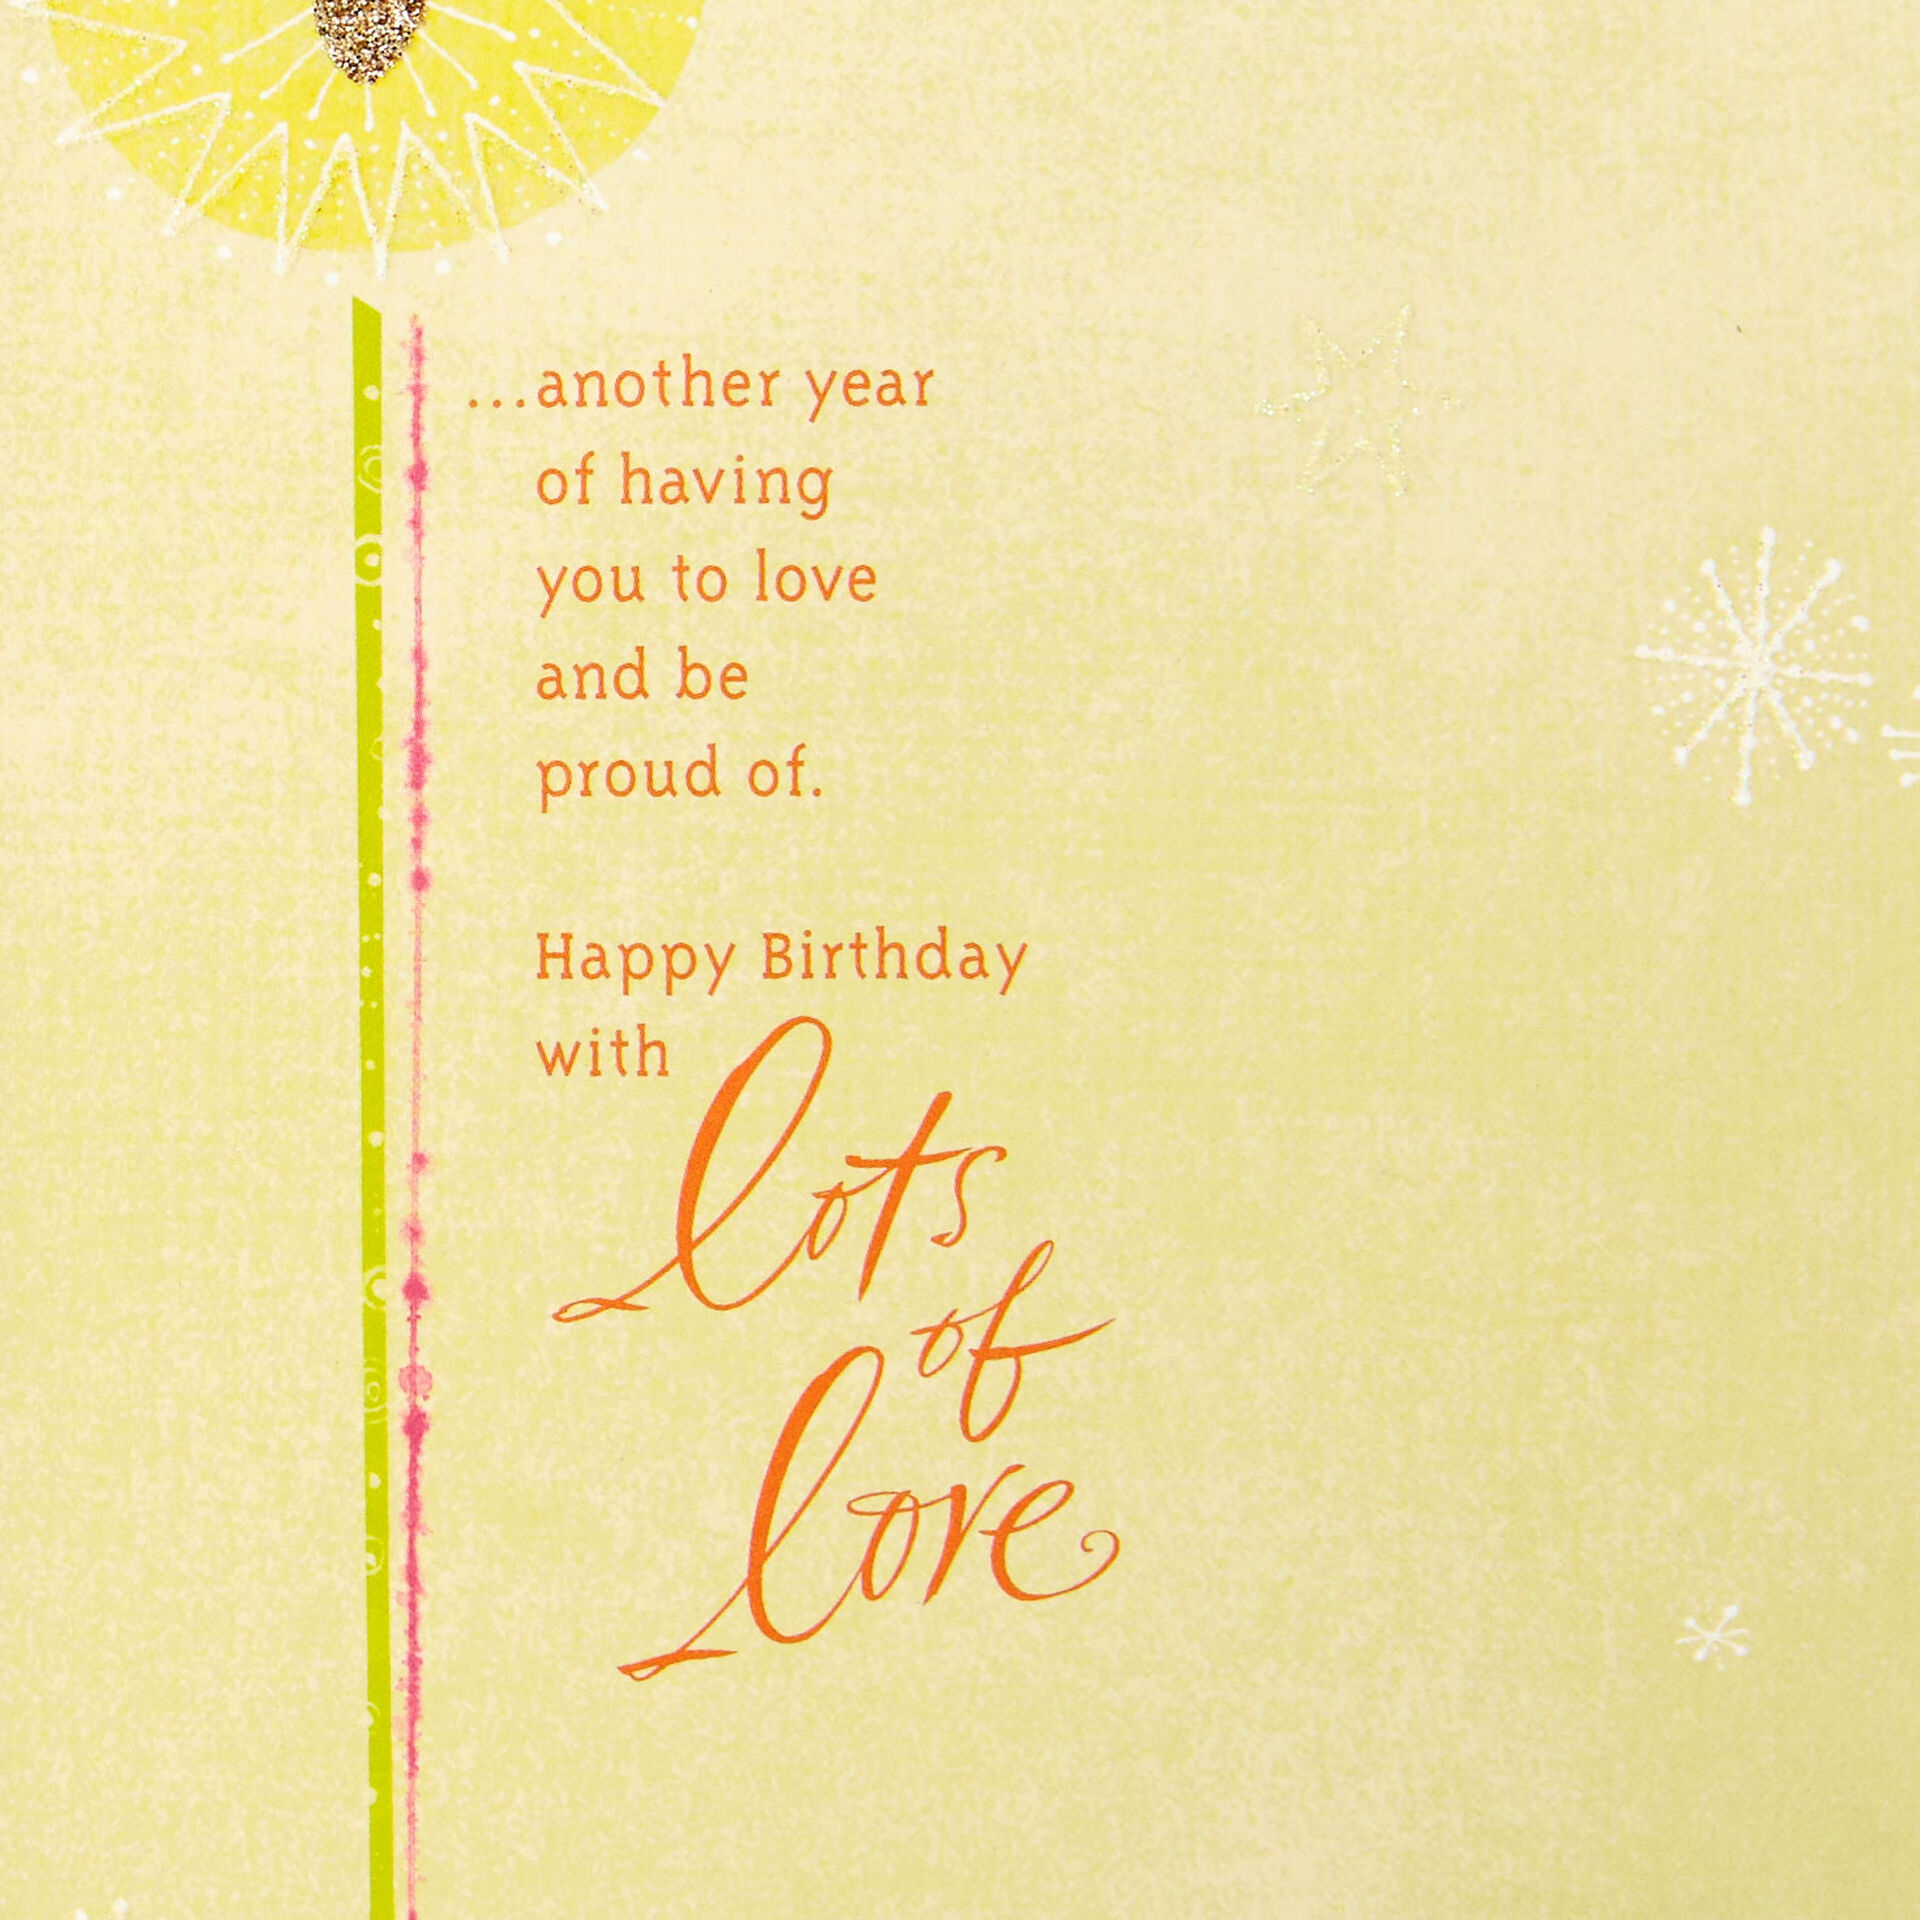 Candles on Your Cake Birthday Card for Daughter - Greeting Cards - Hallmark